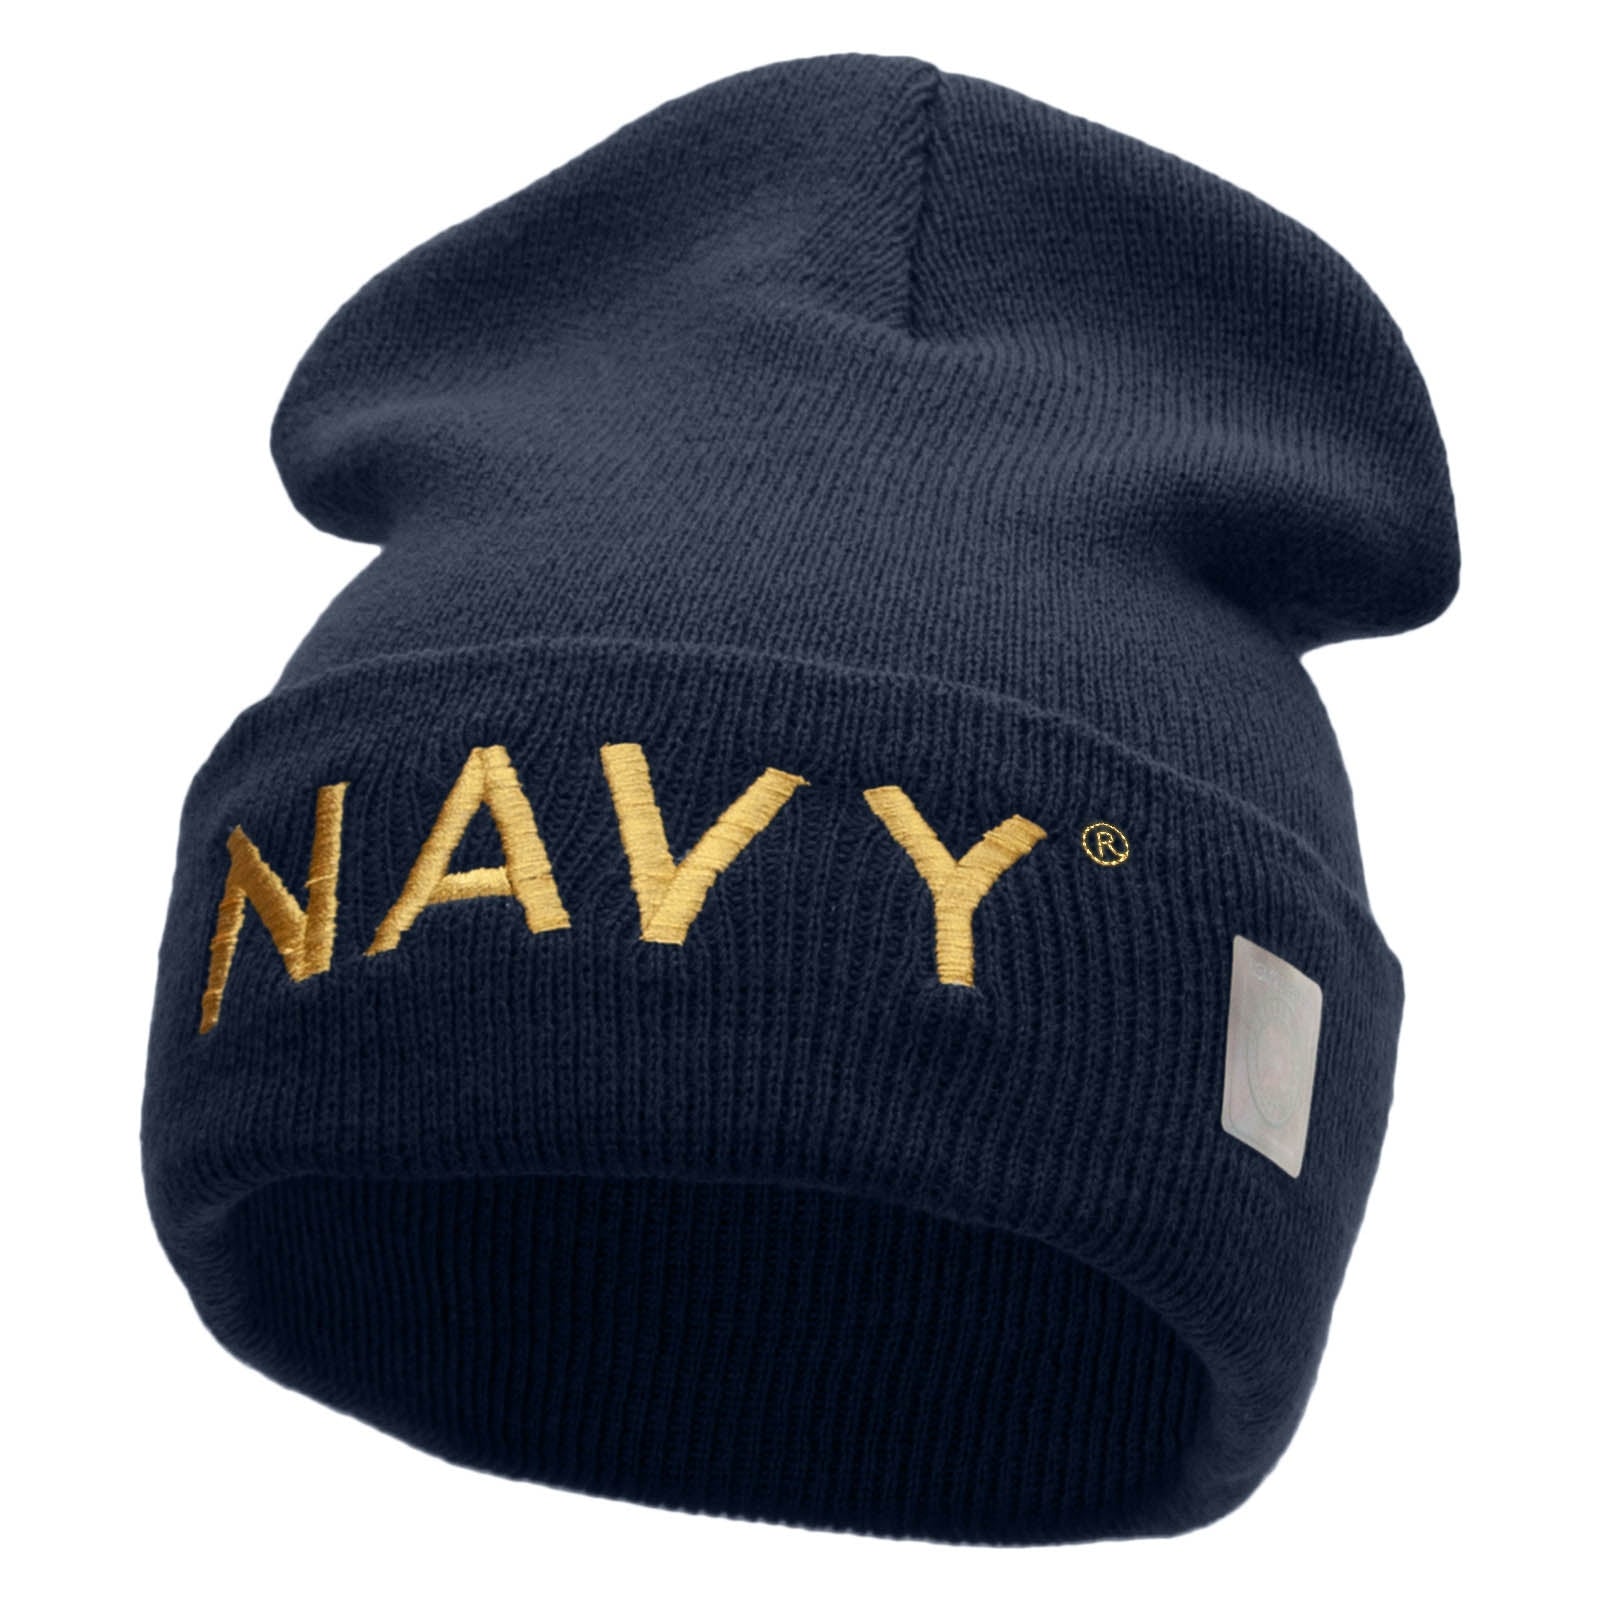 Licensed Navy Embroidered Long Knitted Beanie Made in USA - Navy OSFM